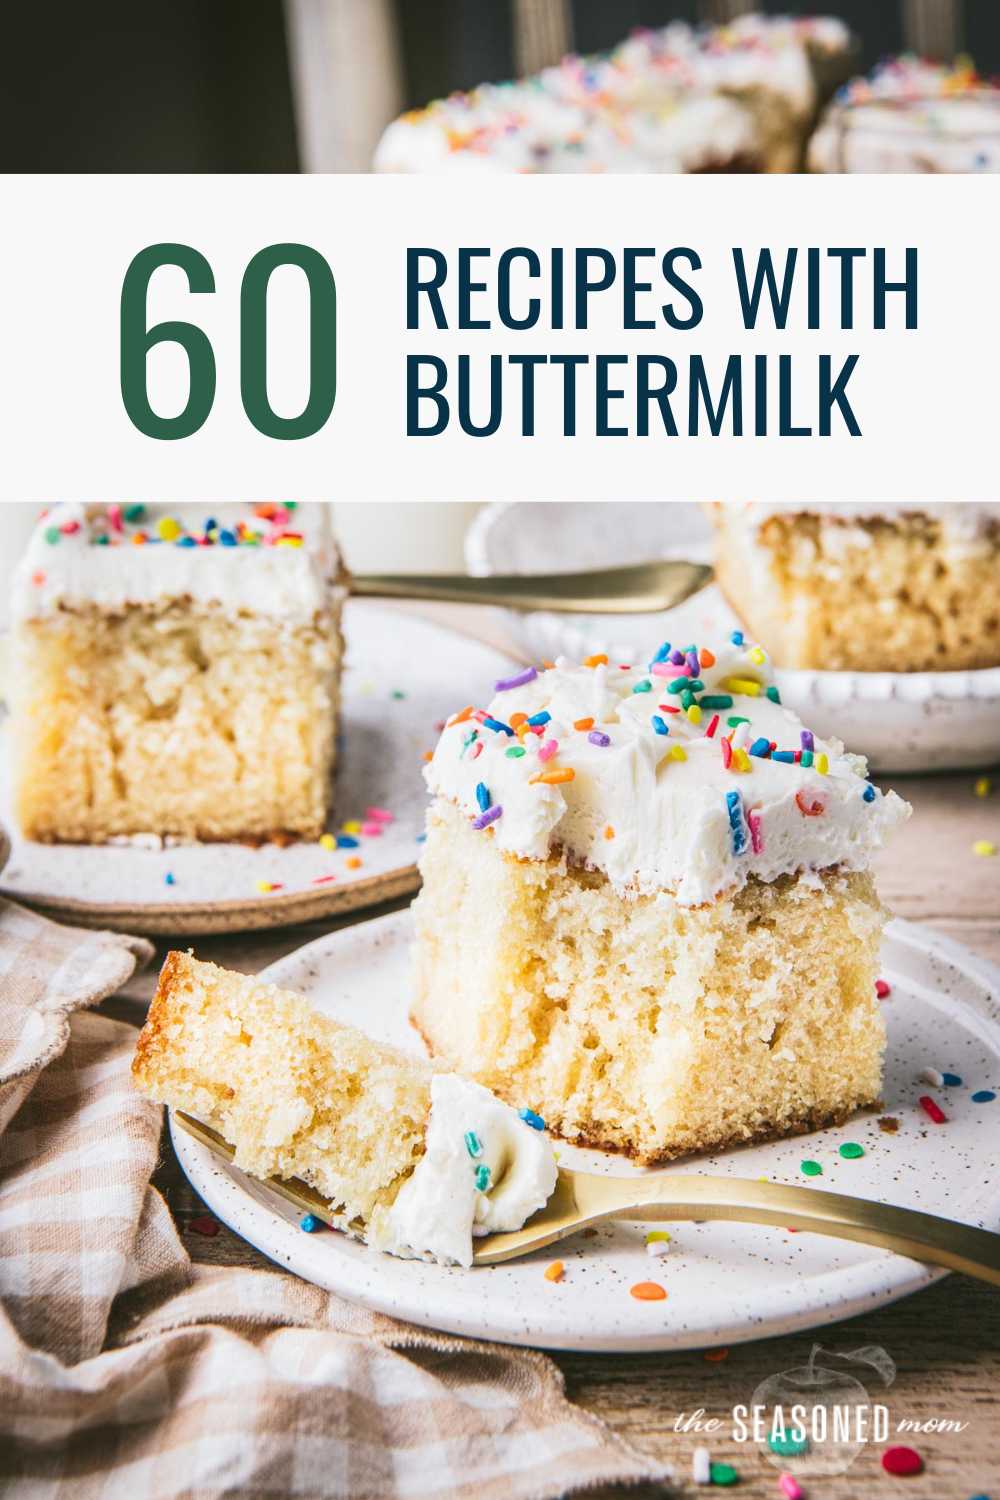 Image of buttermilk cake with text overlay